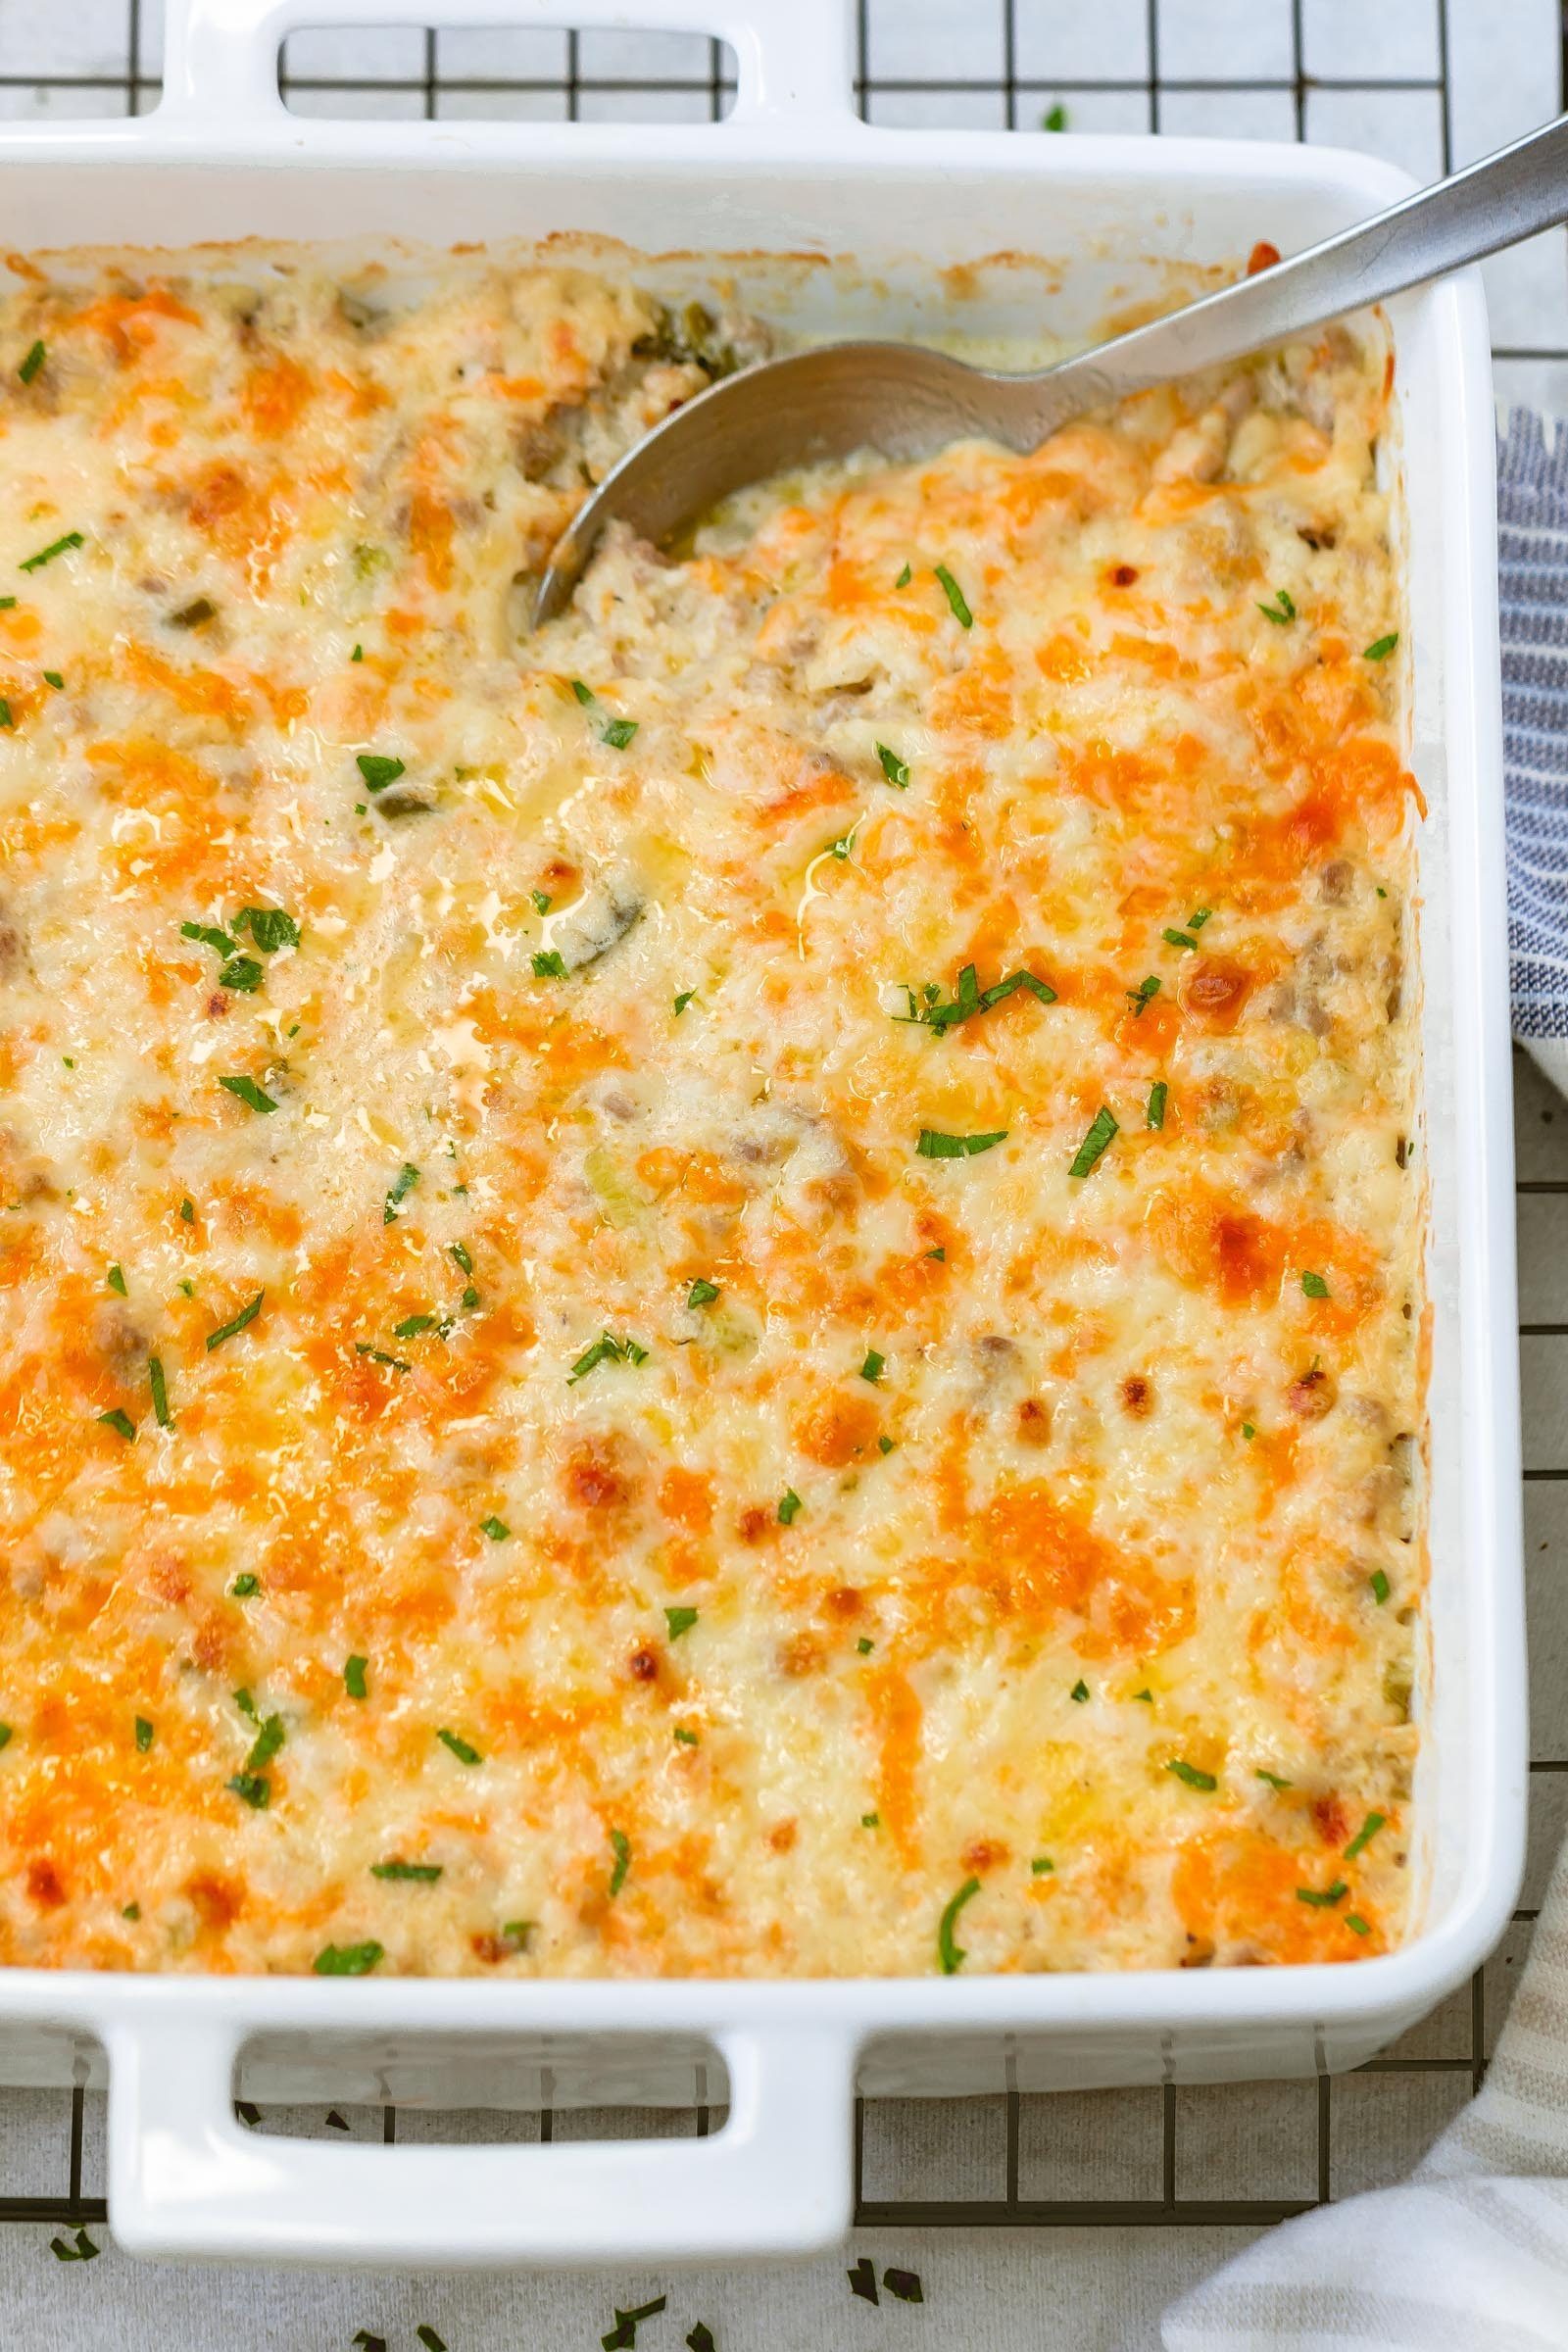 Green Chile Cauliflower Casserole - Warm and addicting comfort food alert! A quick, easy and great for your weekly meal rotation!